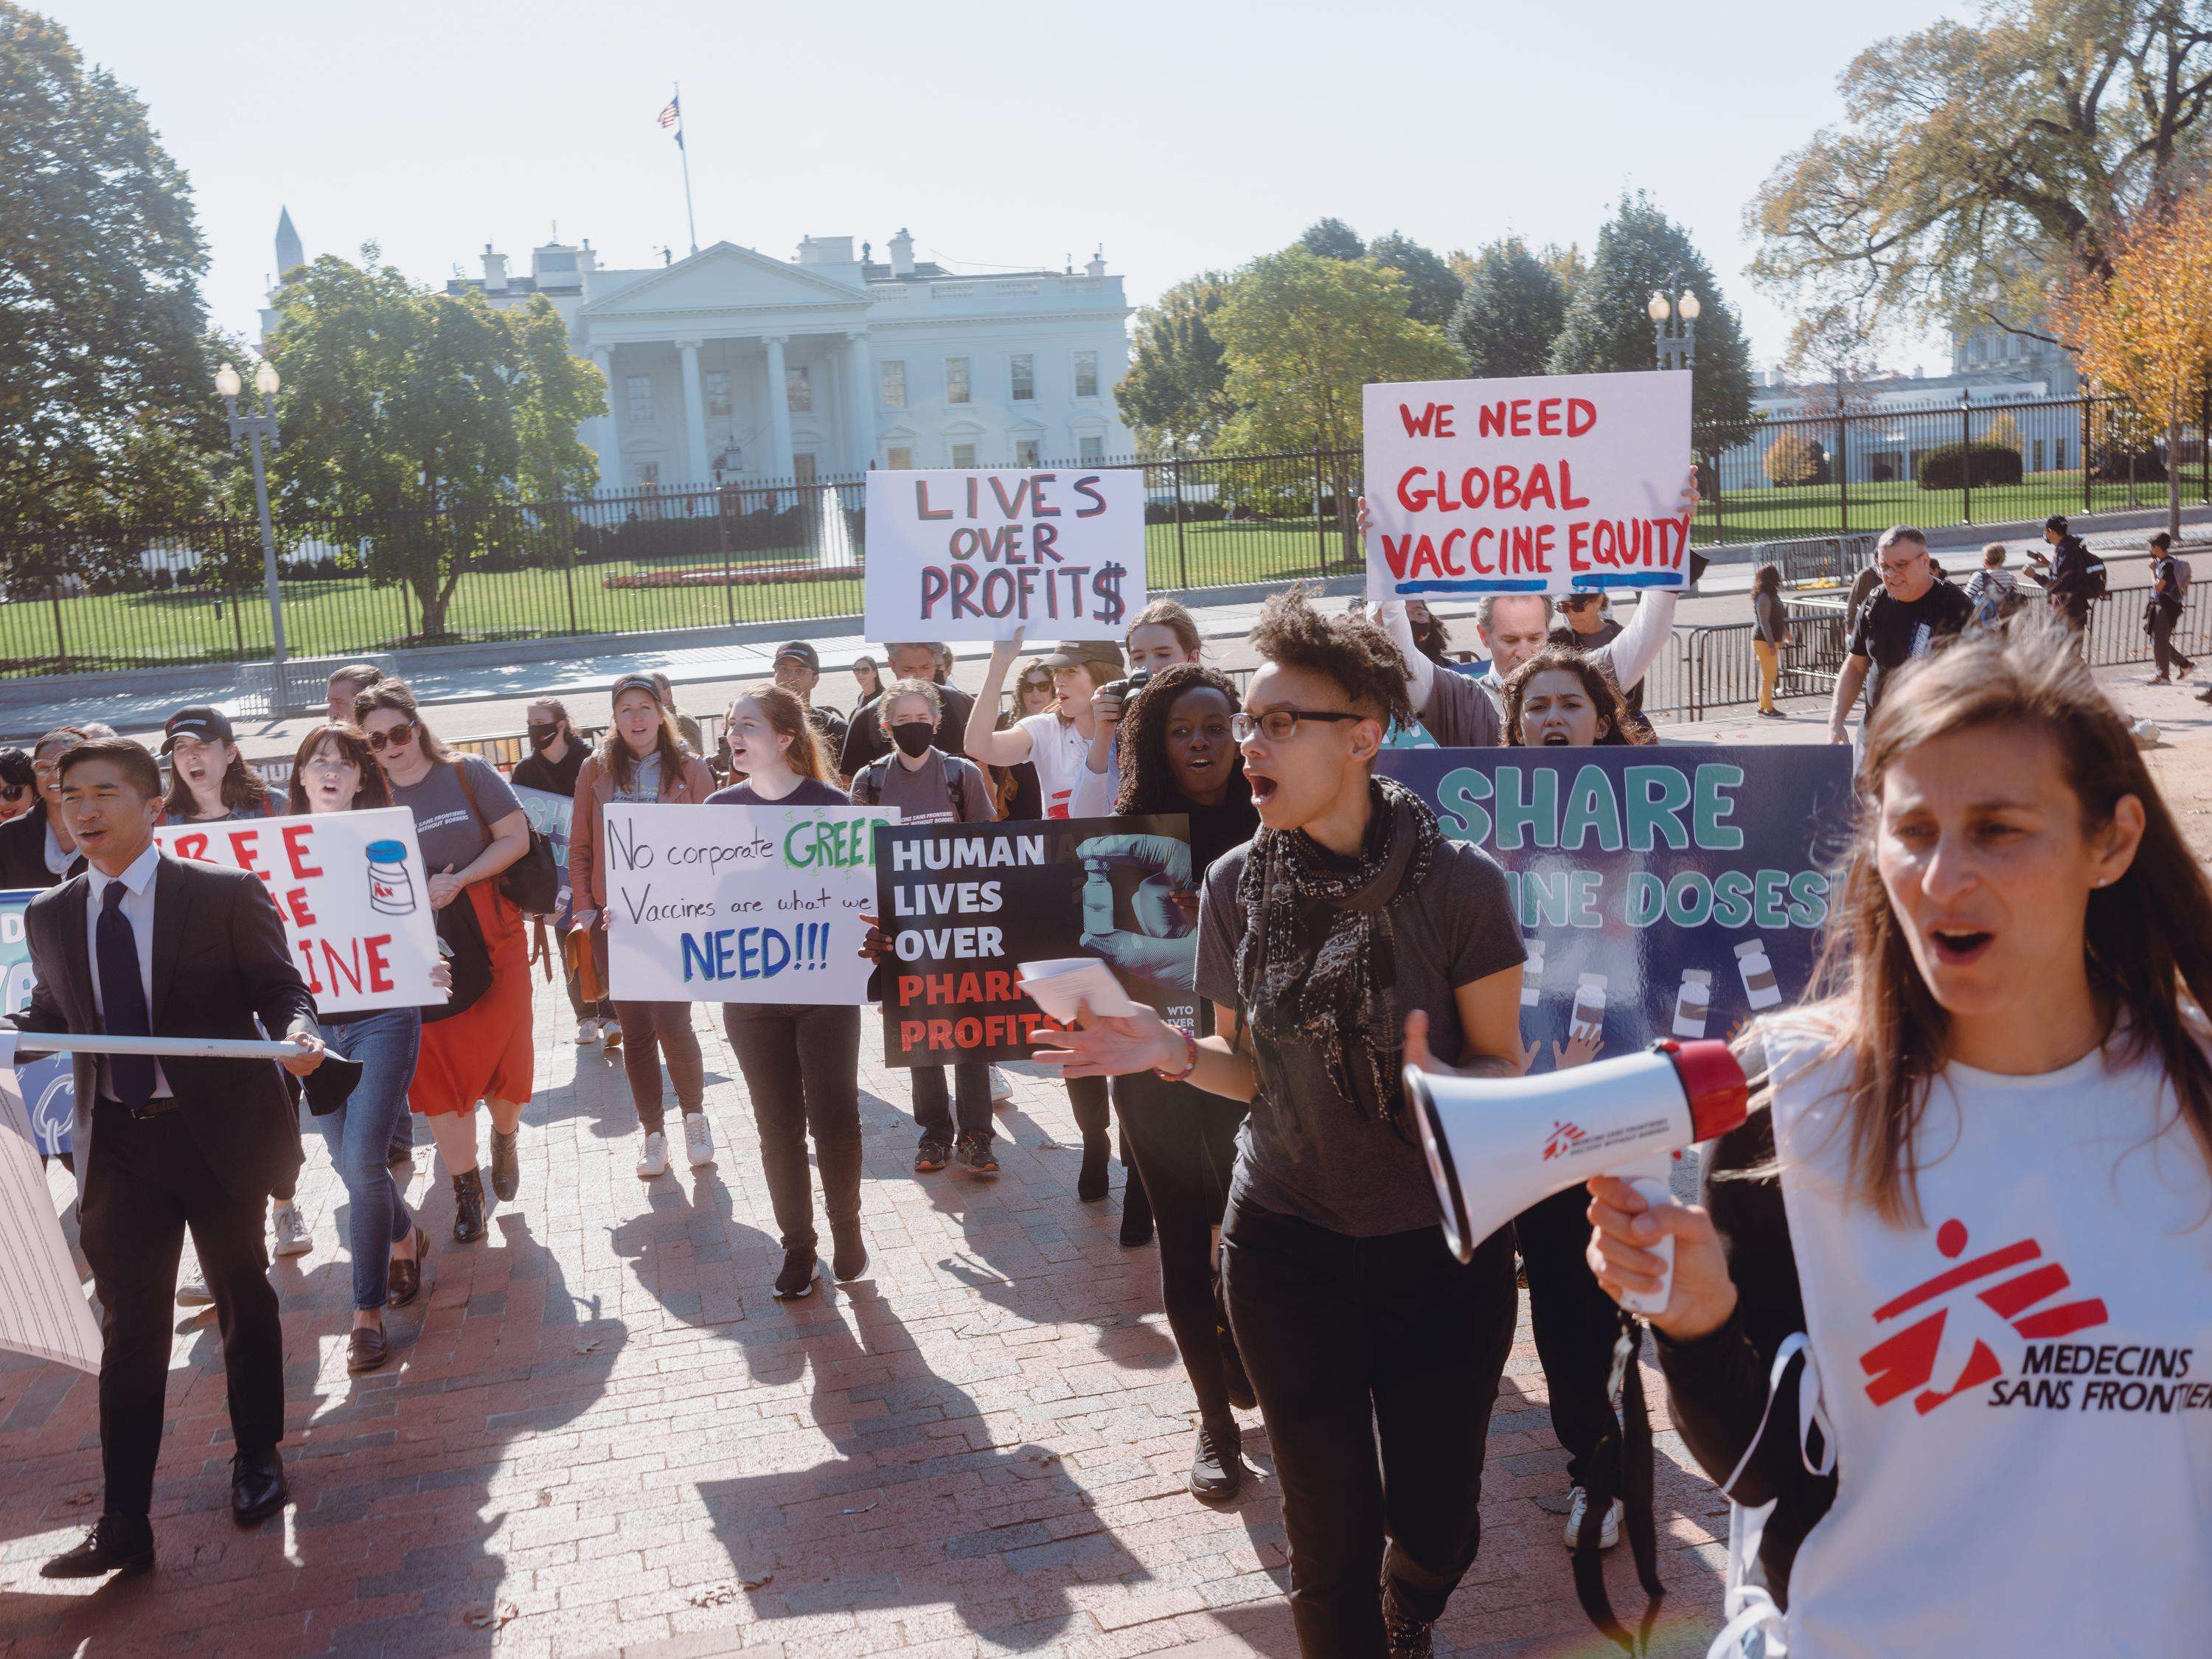 MSF delivers a petition to the White House calling on President Biden to free the vaccine for COVID-19.